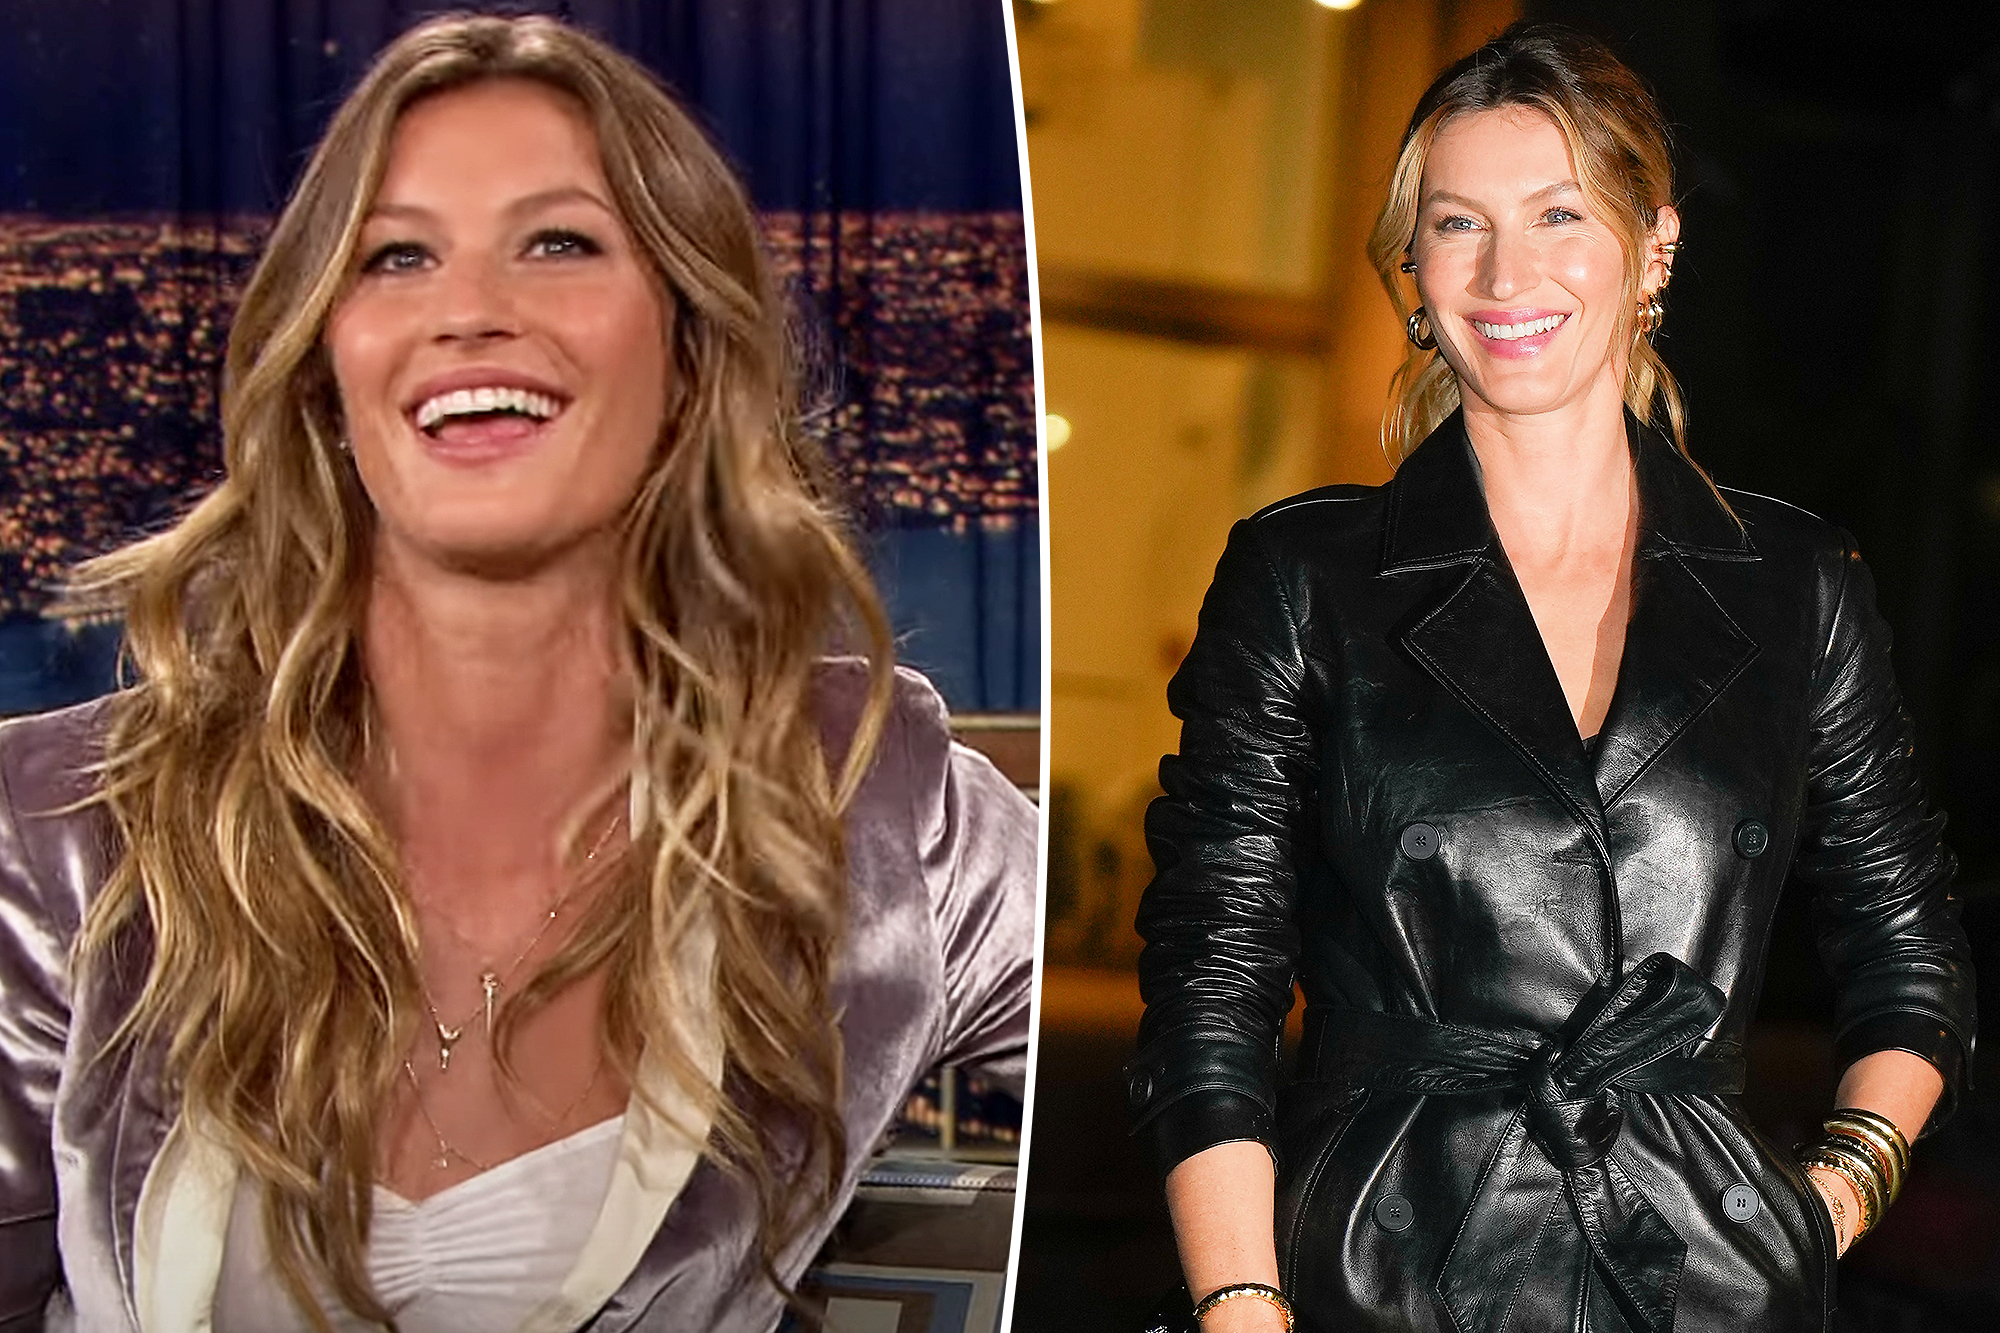 Gisele Bündchen Sets the Record Straight on Her Name Pronunciation